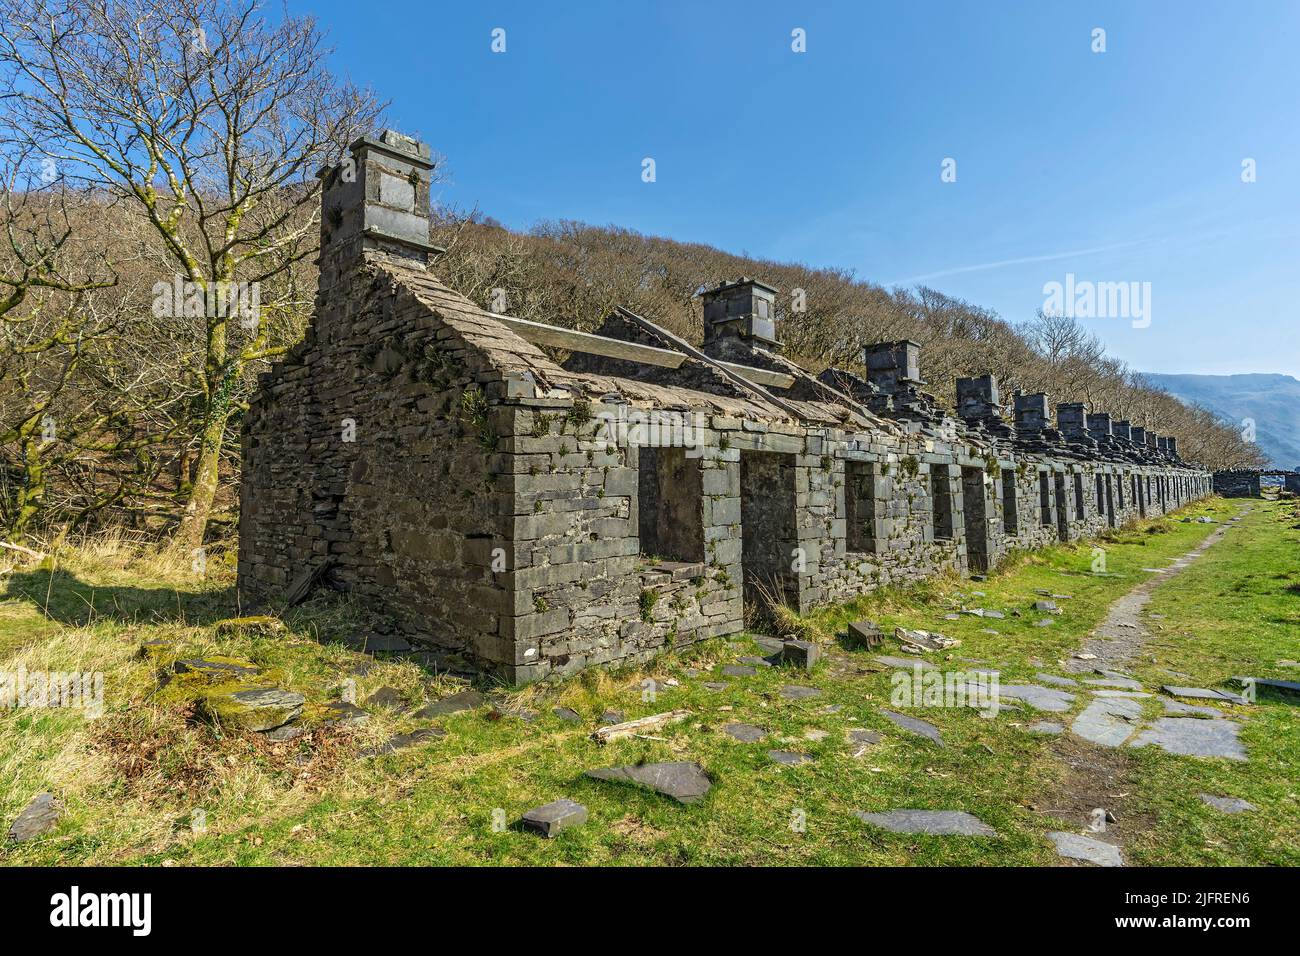 Anglesey barracks used as accommodation for workers during the working week at Dinorwic Slate Quarry near Llanberis North Wales UK March 2017 Stock Photo